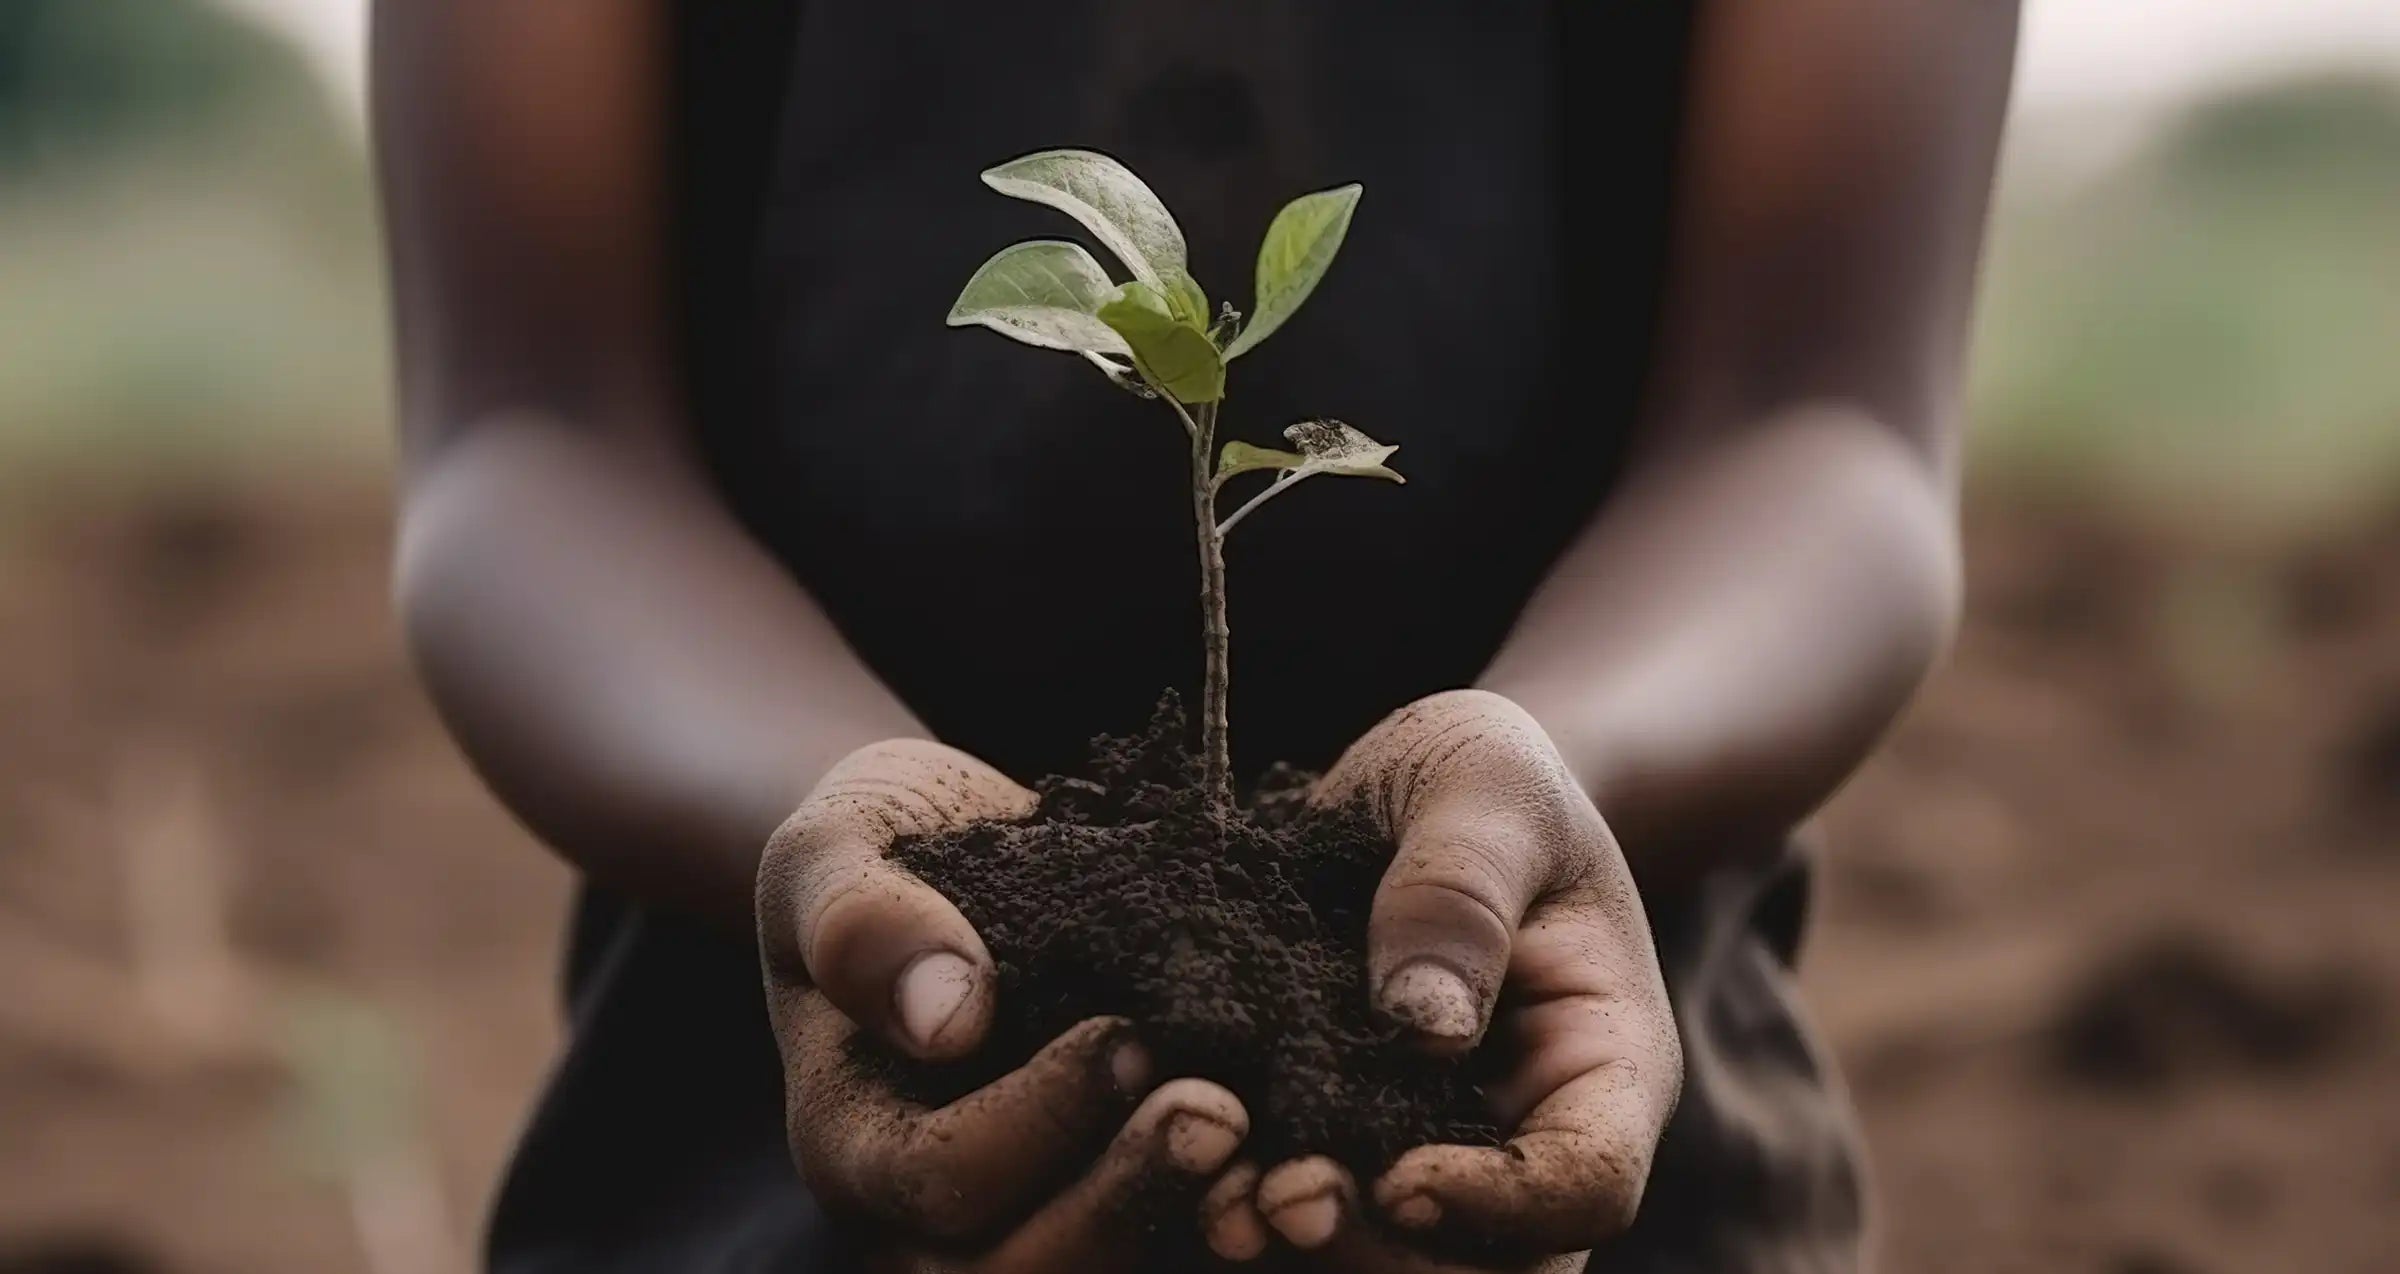 A set of hands cupping the soil around the roots of a small seedling